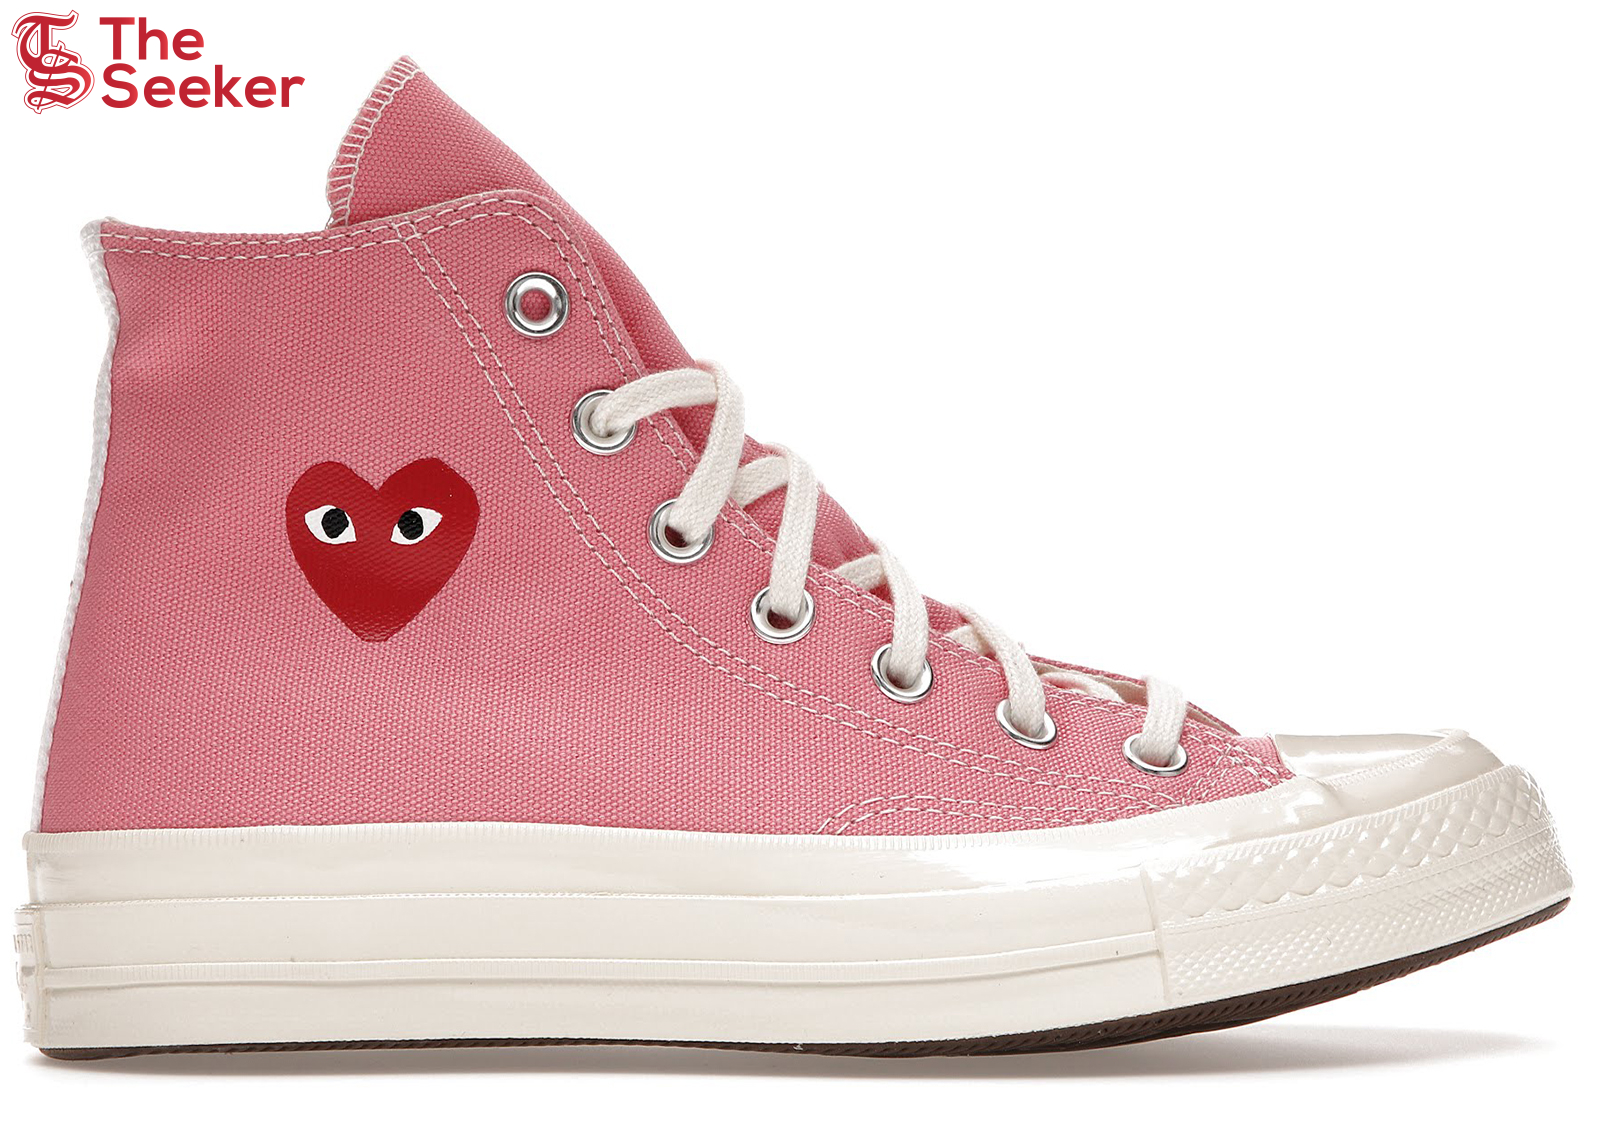 Converse Chuck Taylor All-Star 70 Hi Comme des Garcons Play Bright Pink